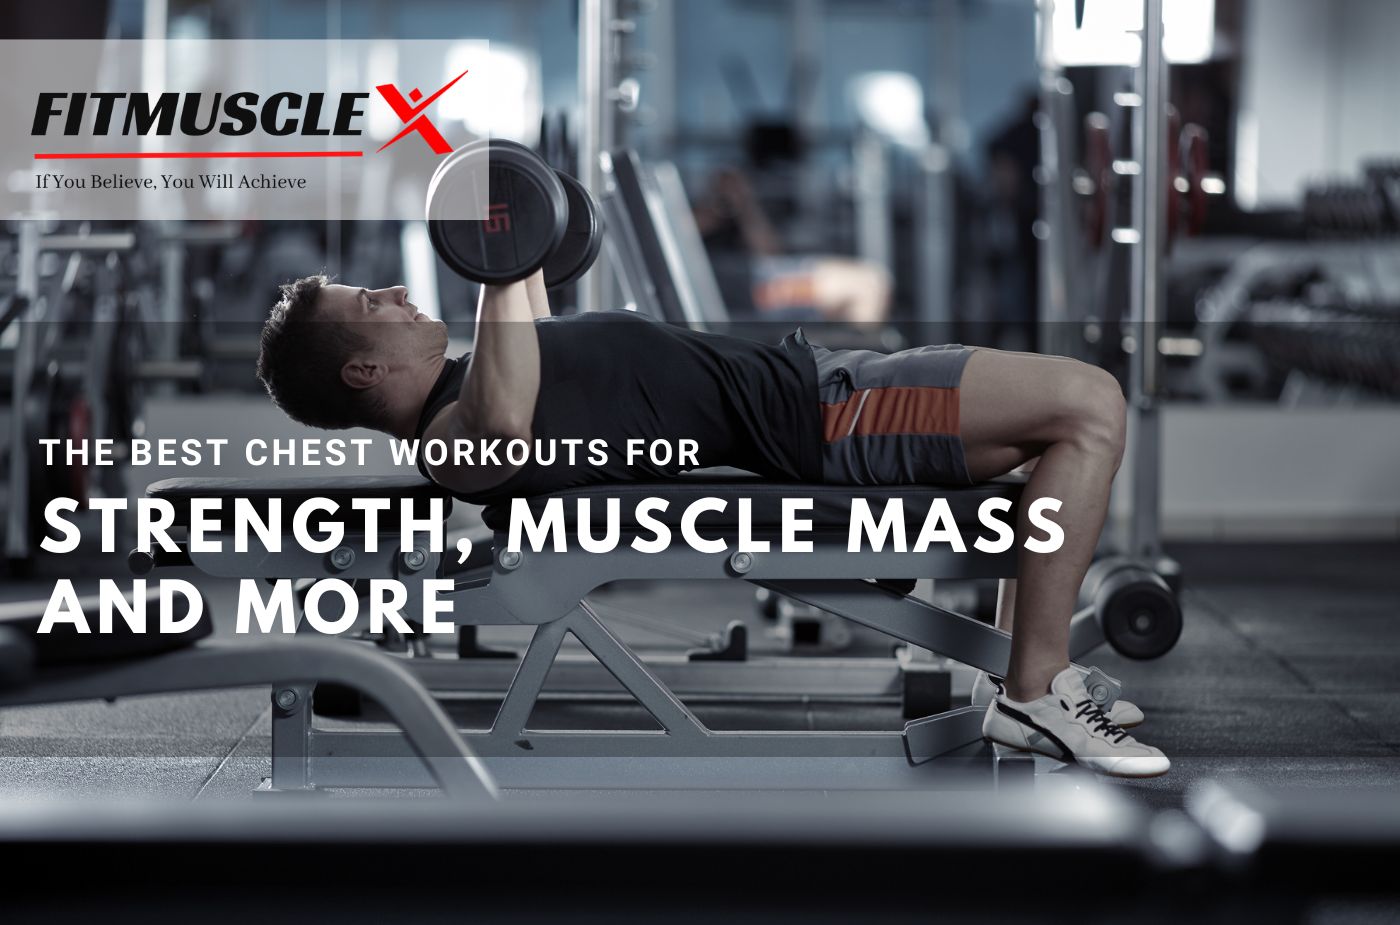 The Best Chest Workouts for Strength, Muscle Mass and More